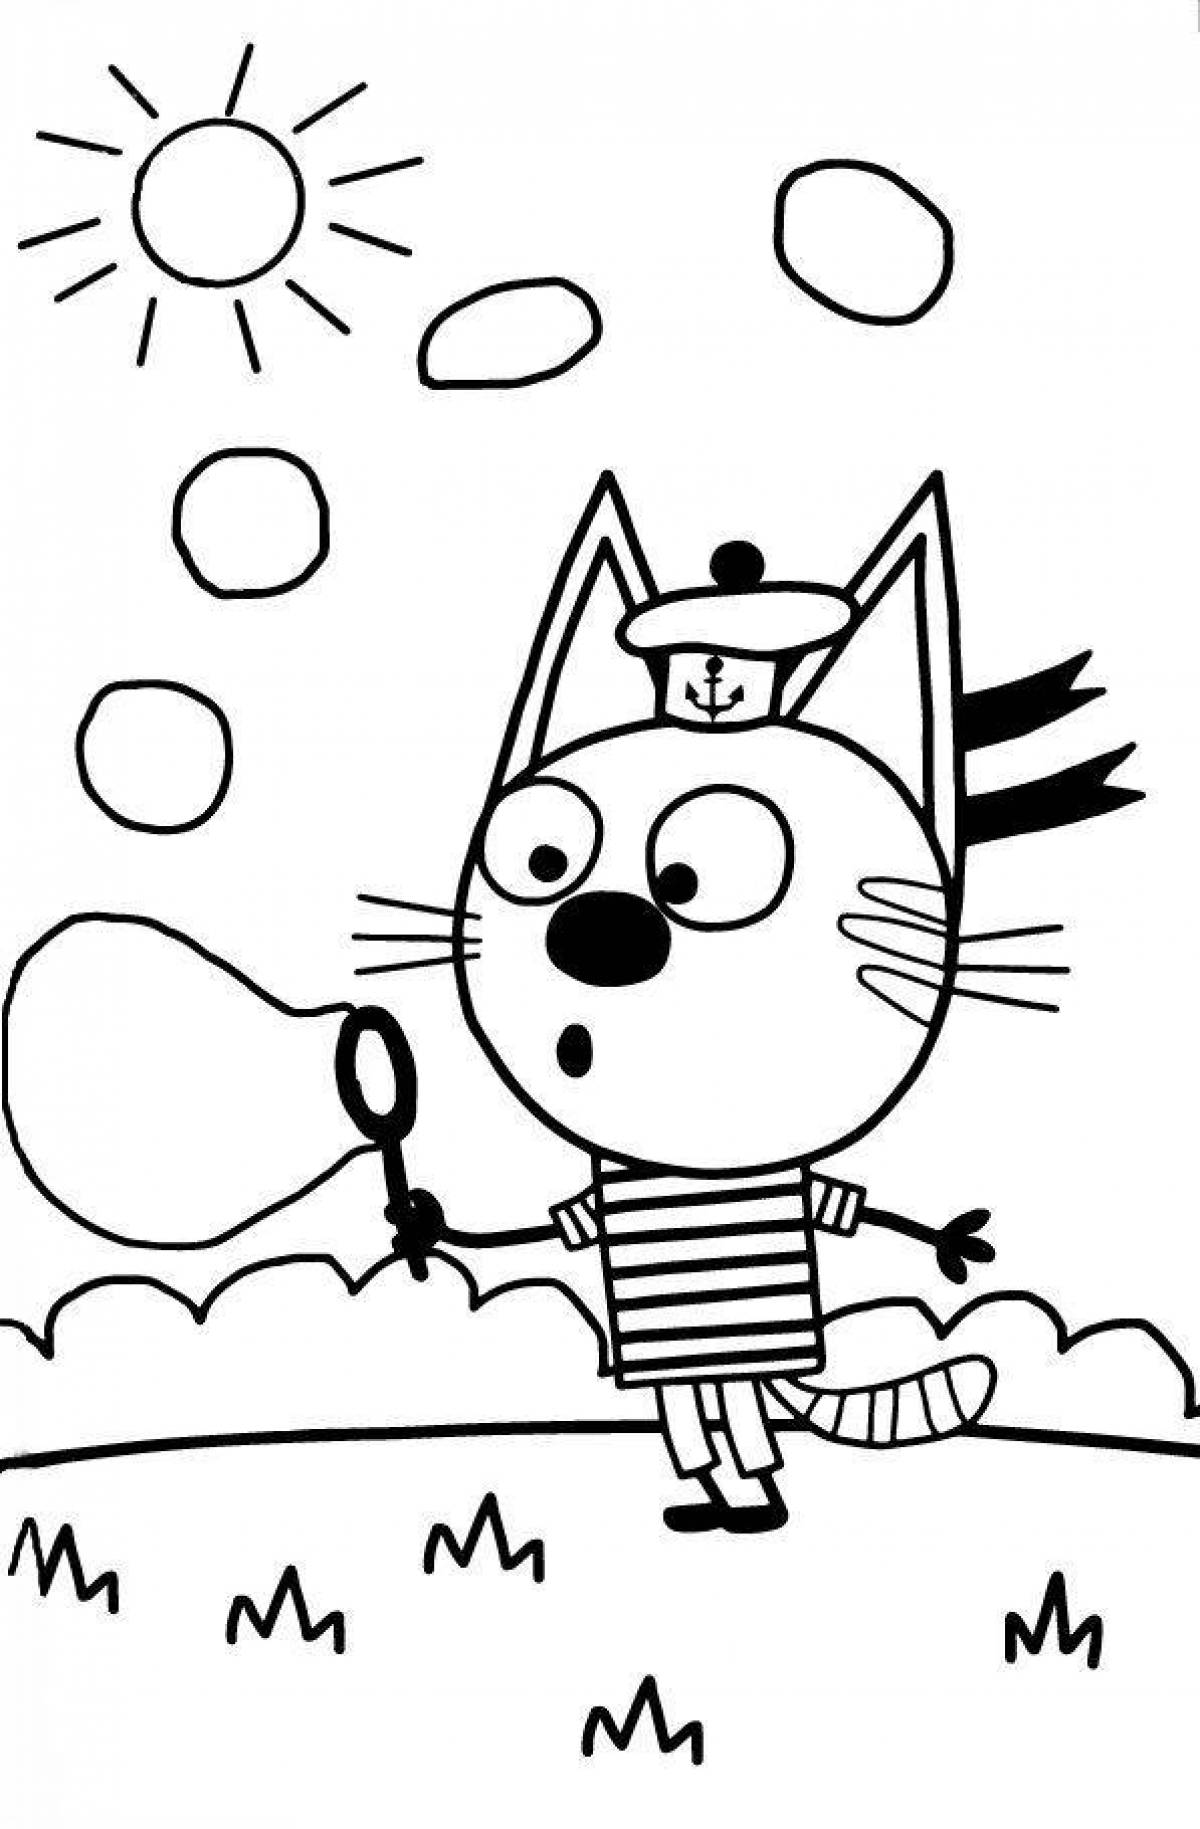 Glowing three cats coloring page for girls